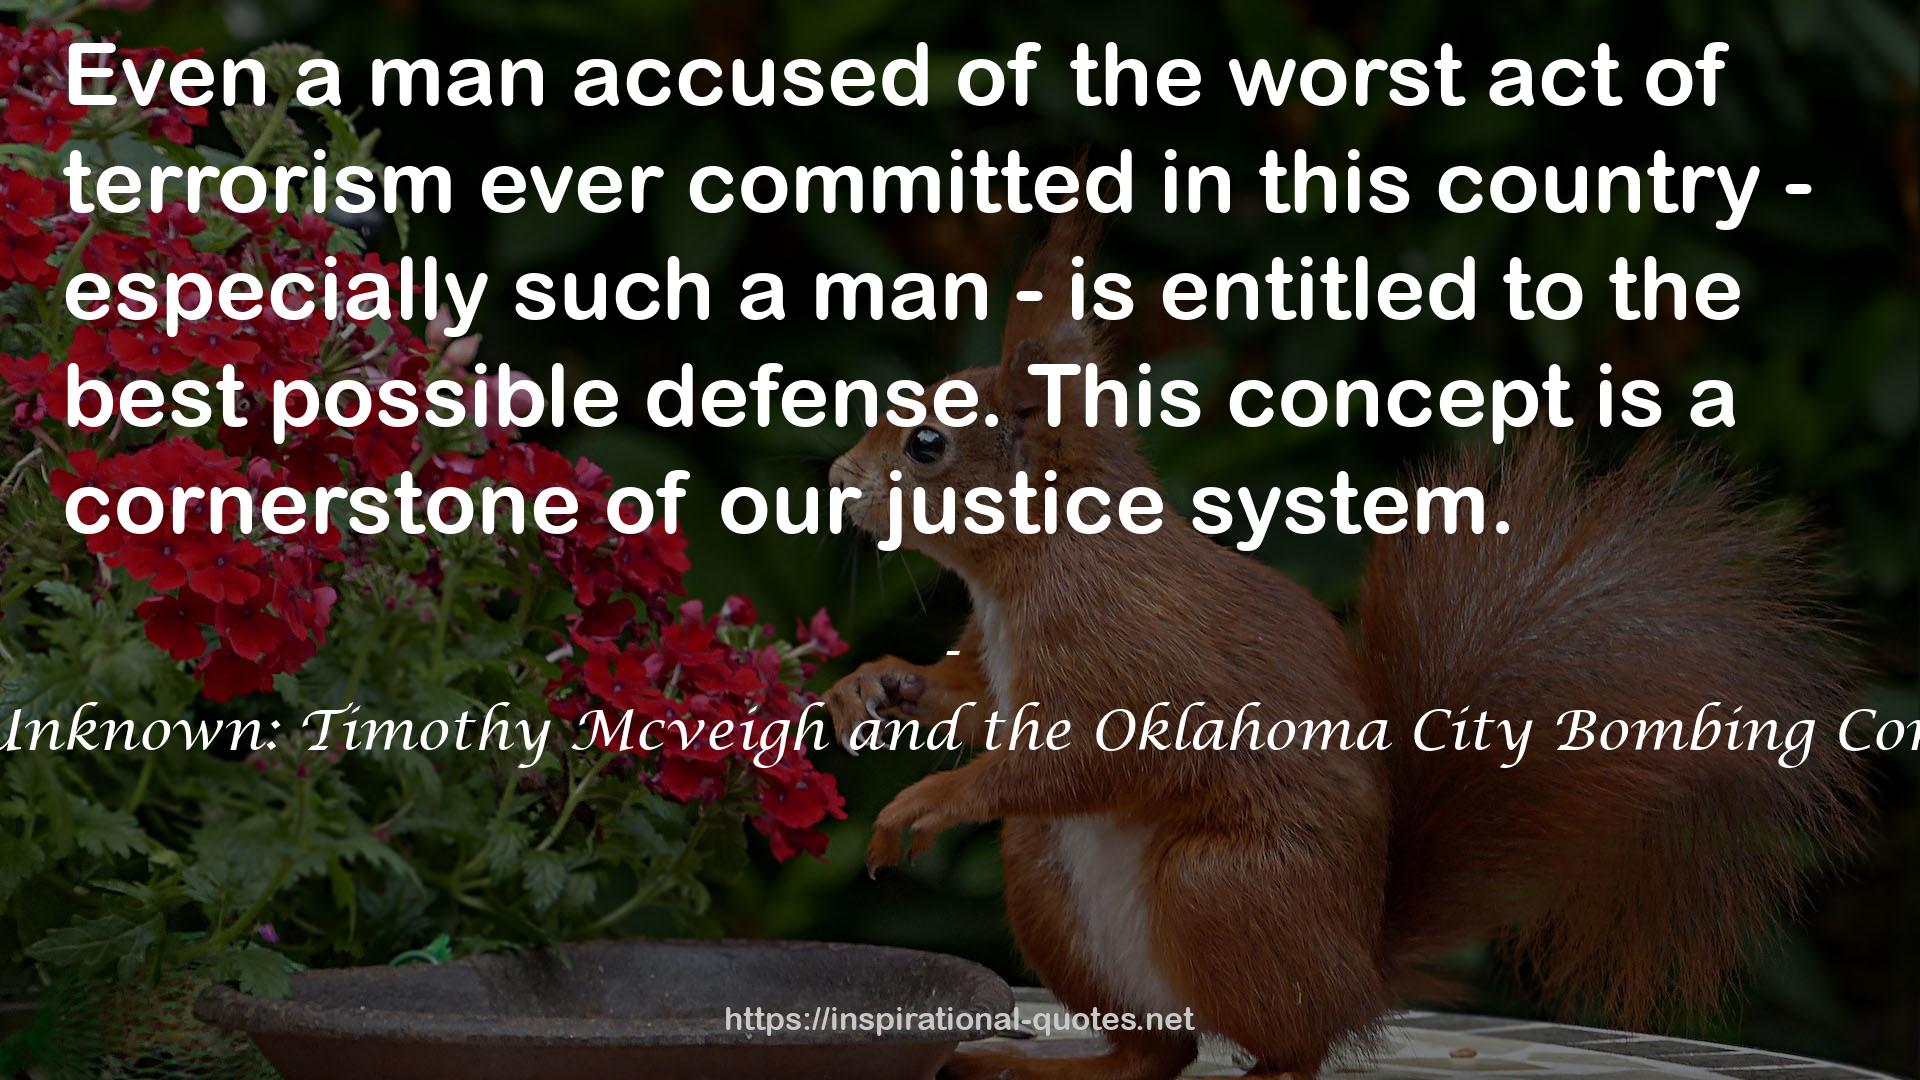 Others Unknown: Timothy Mcveigh and the Oklahoma City Bombing Conspiracy QUOTES